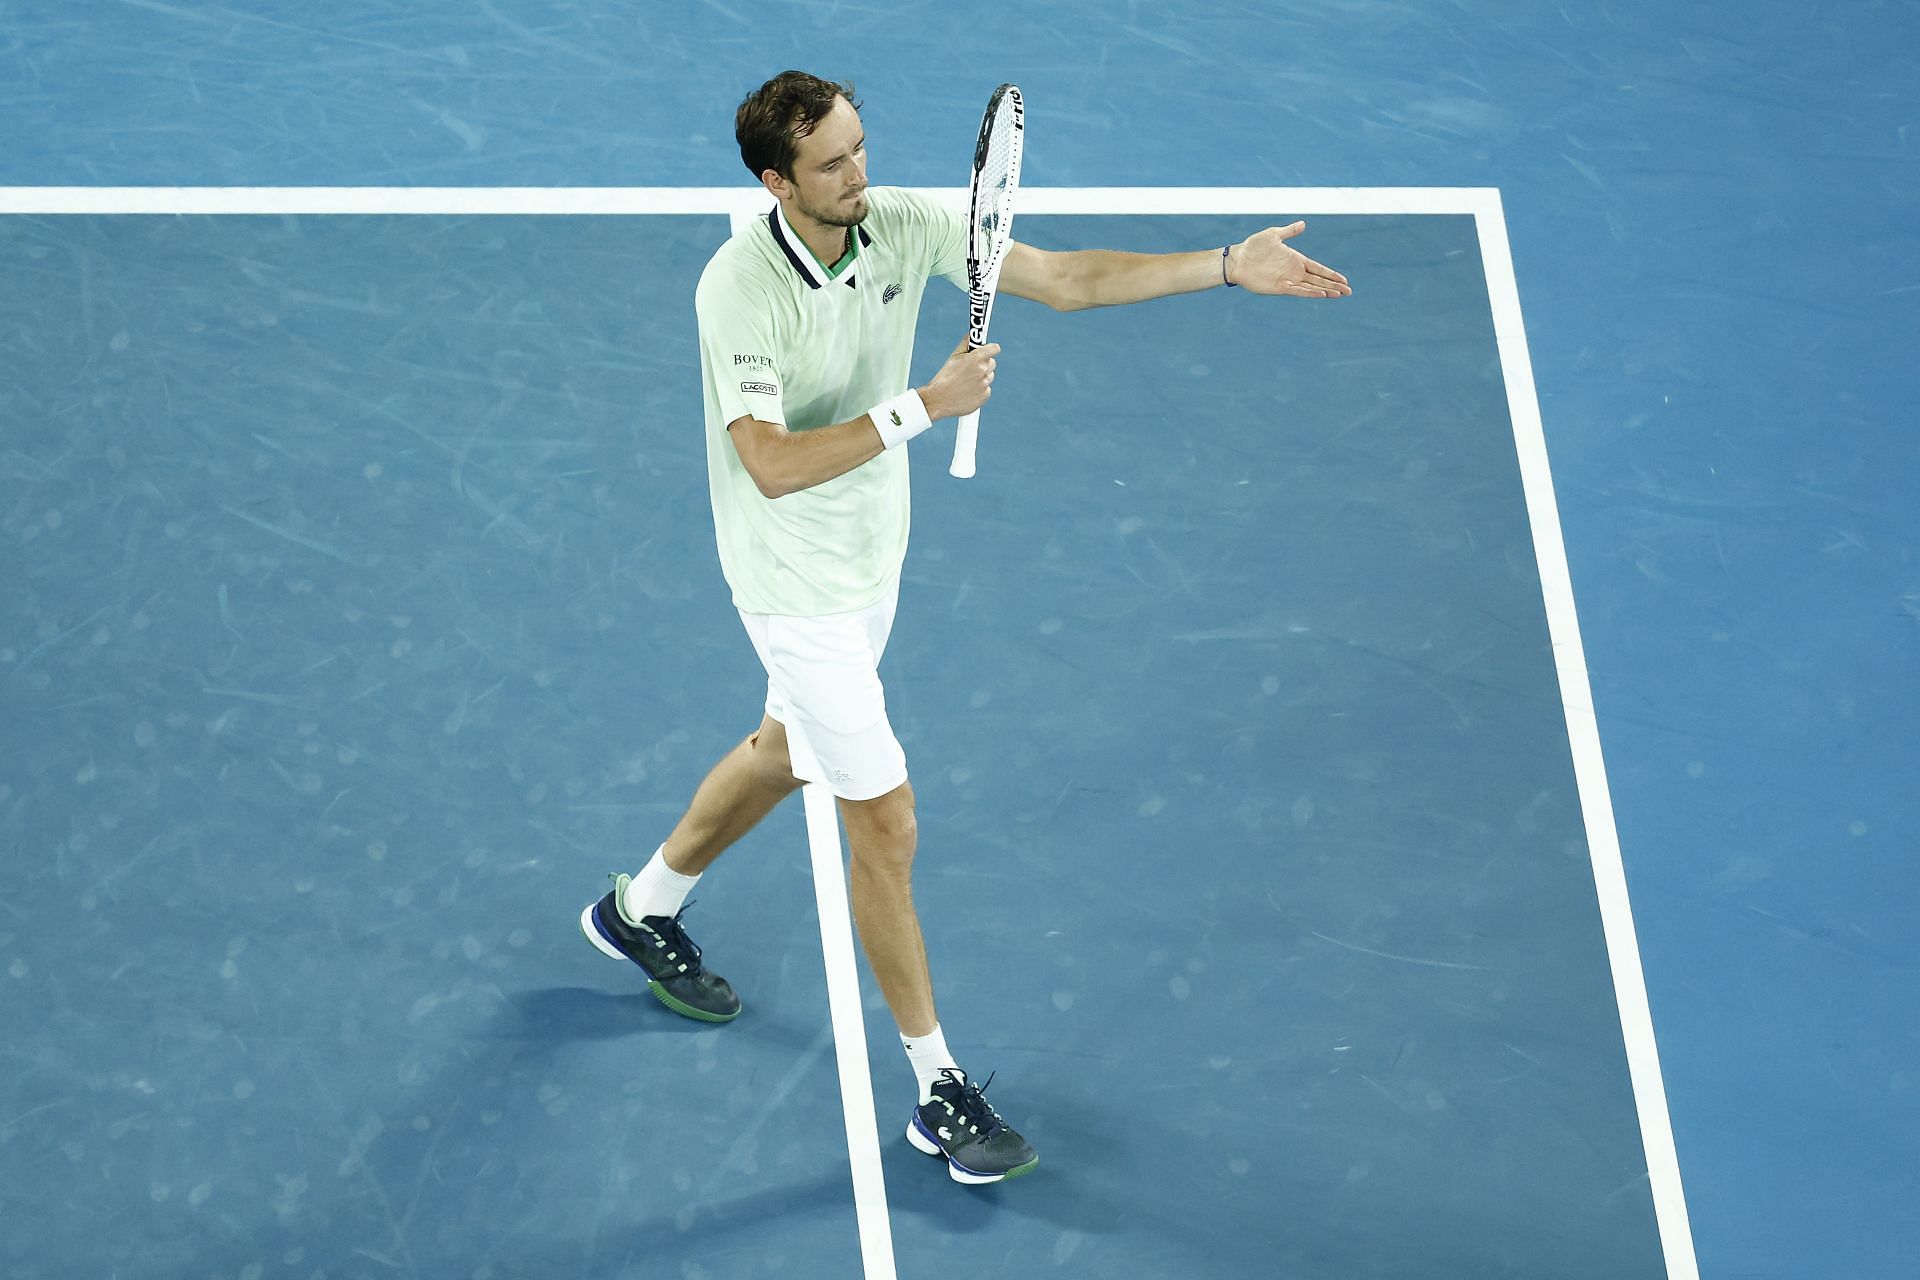 Medvedev during his semifinal match at the 2022 Australian Open.